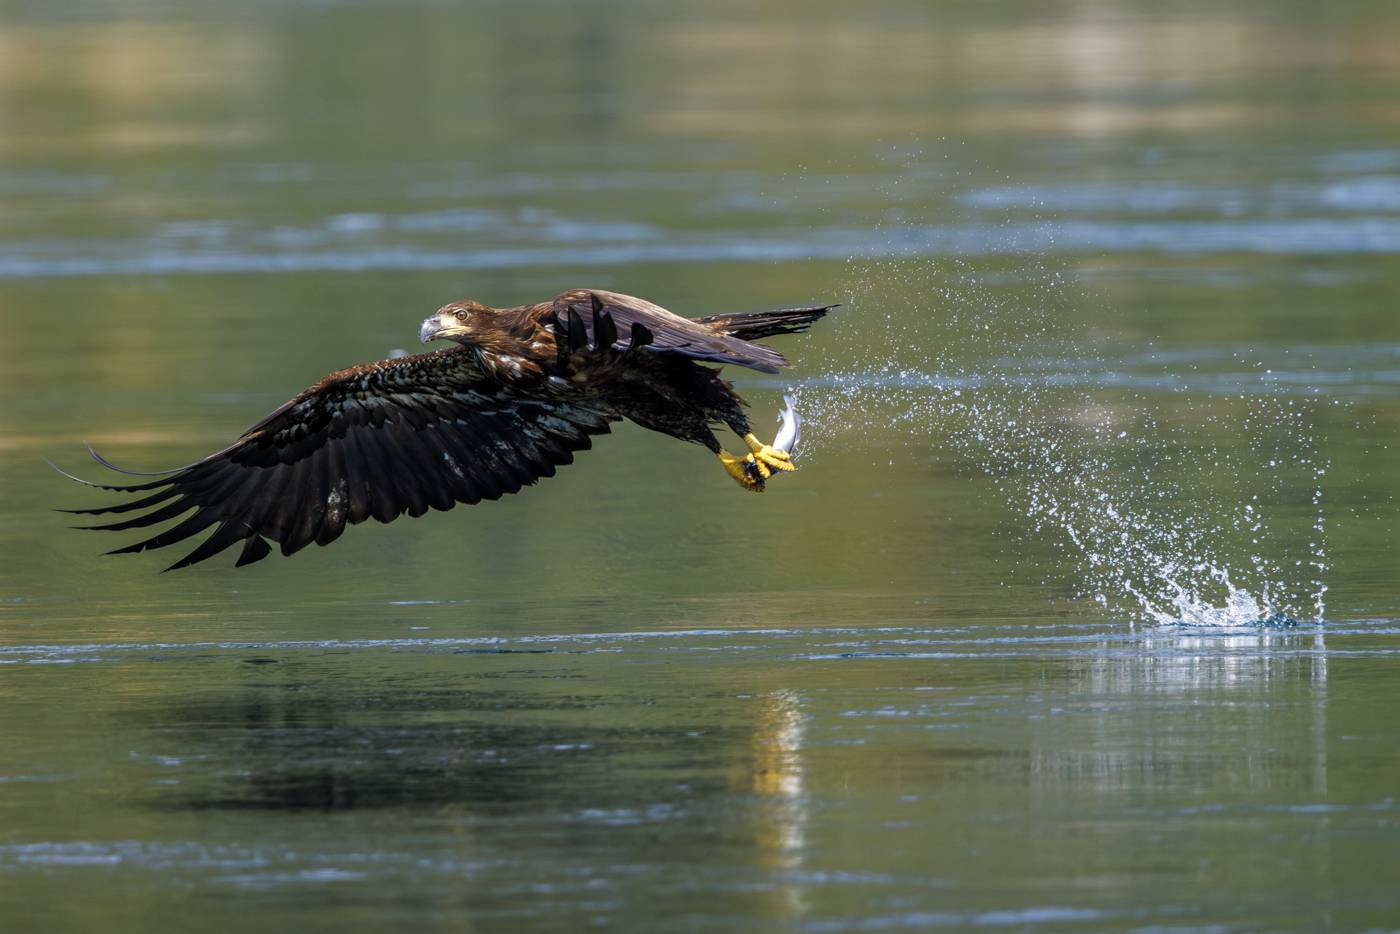 A juvenile eagle flies with fish in talons.